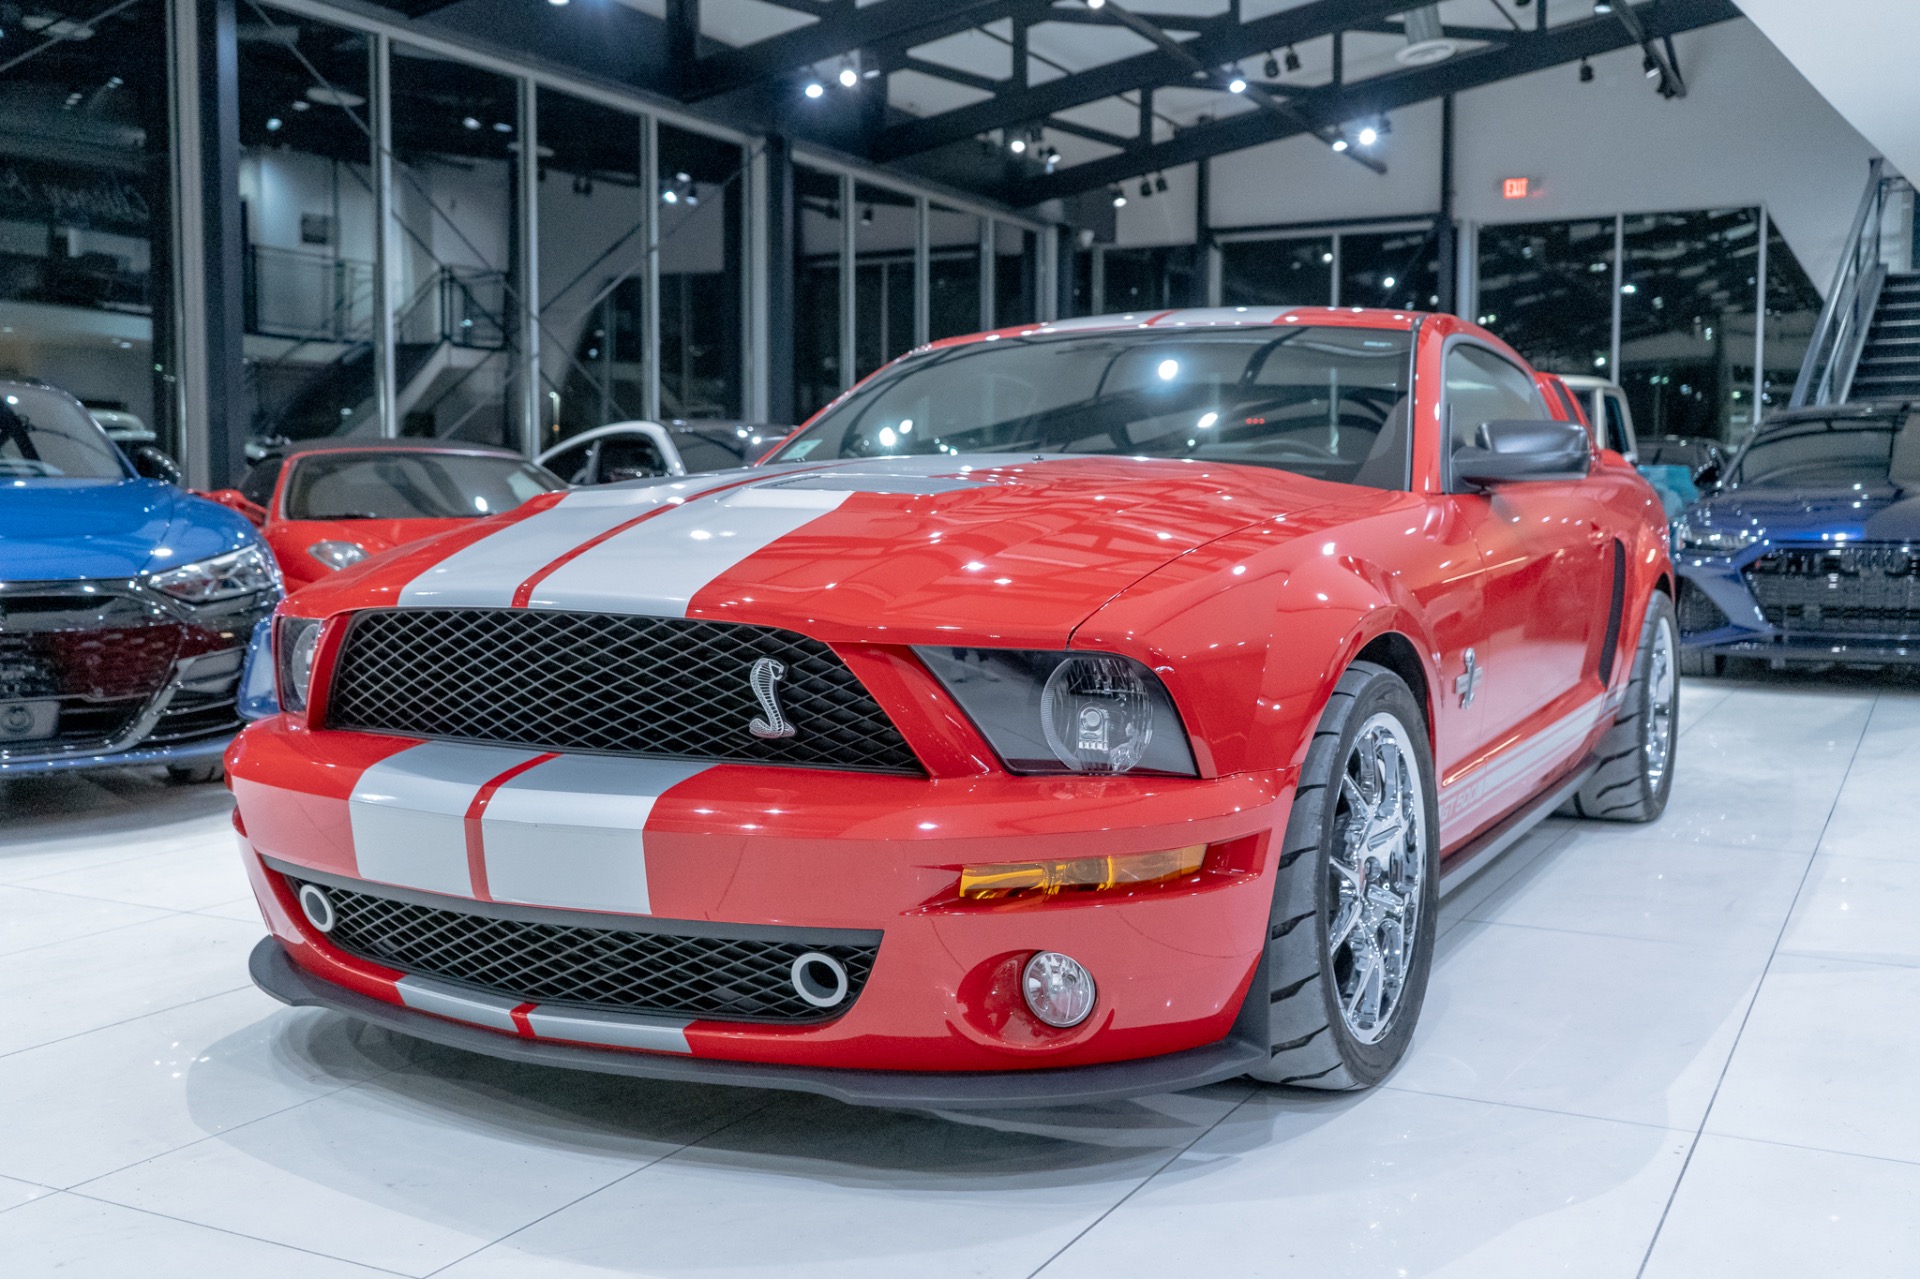 Used-2008-Ford-Shelby-GT500-Coupe-only-5k-Miles-660WHP-Tasteful-Upgrades-Incredible-condition